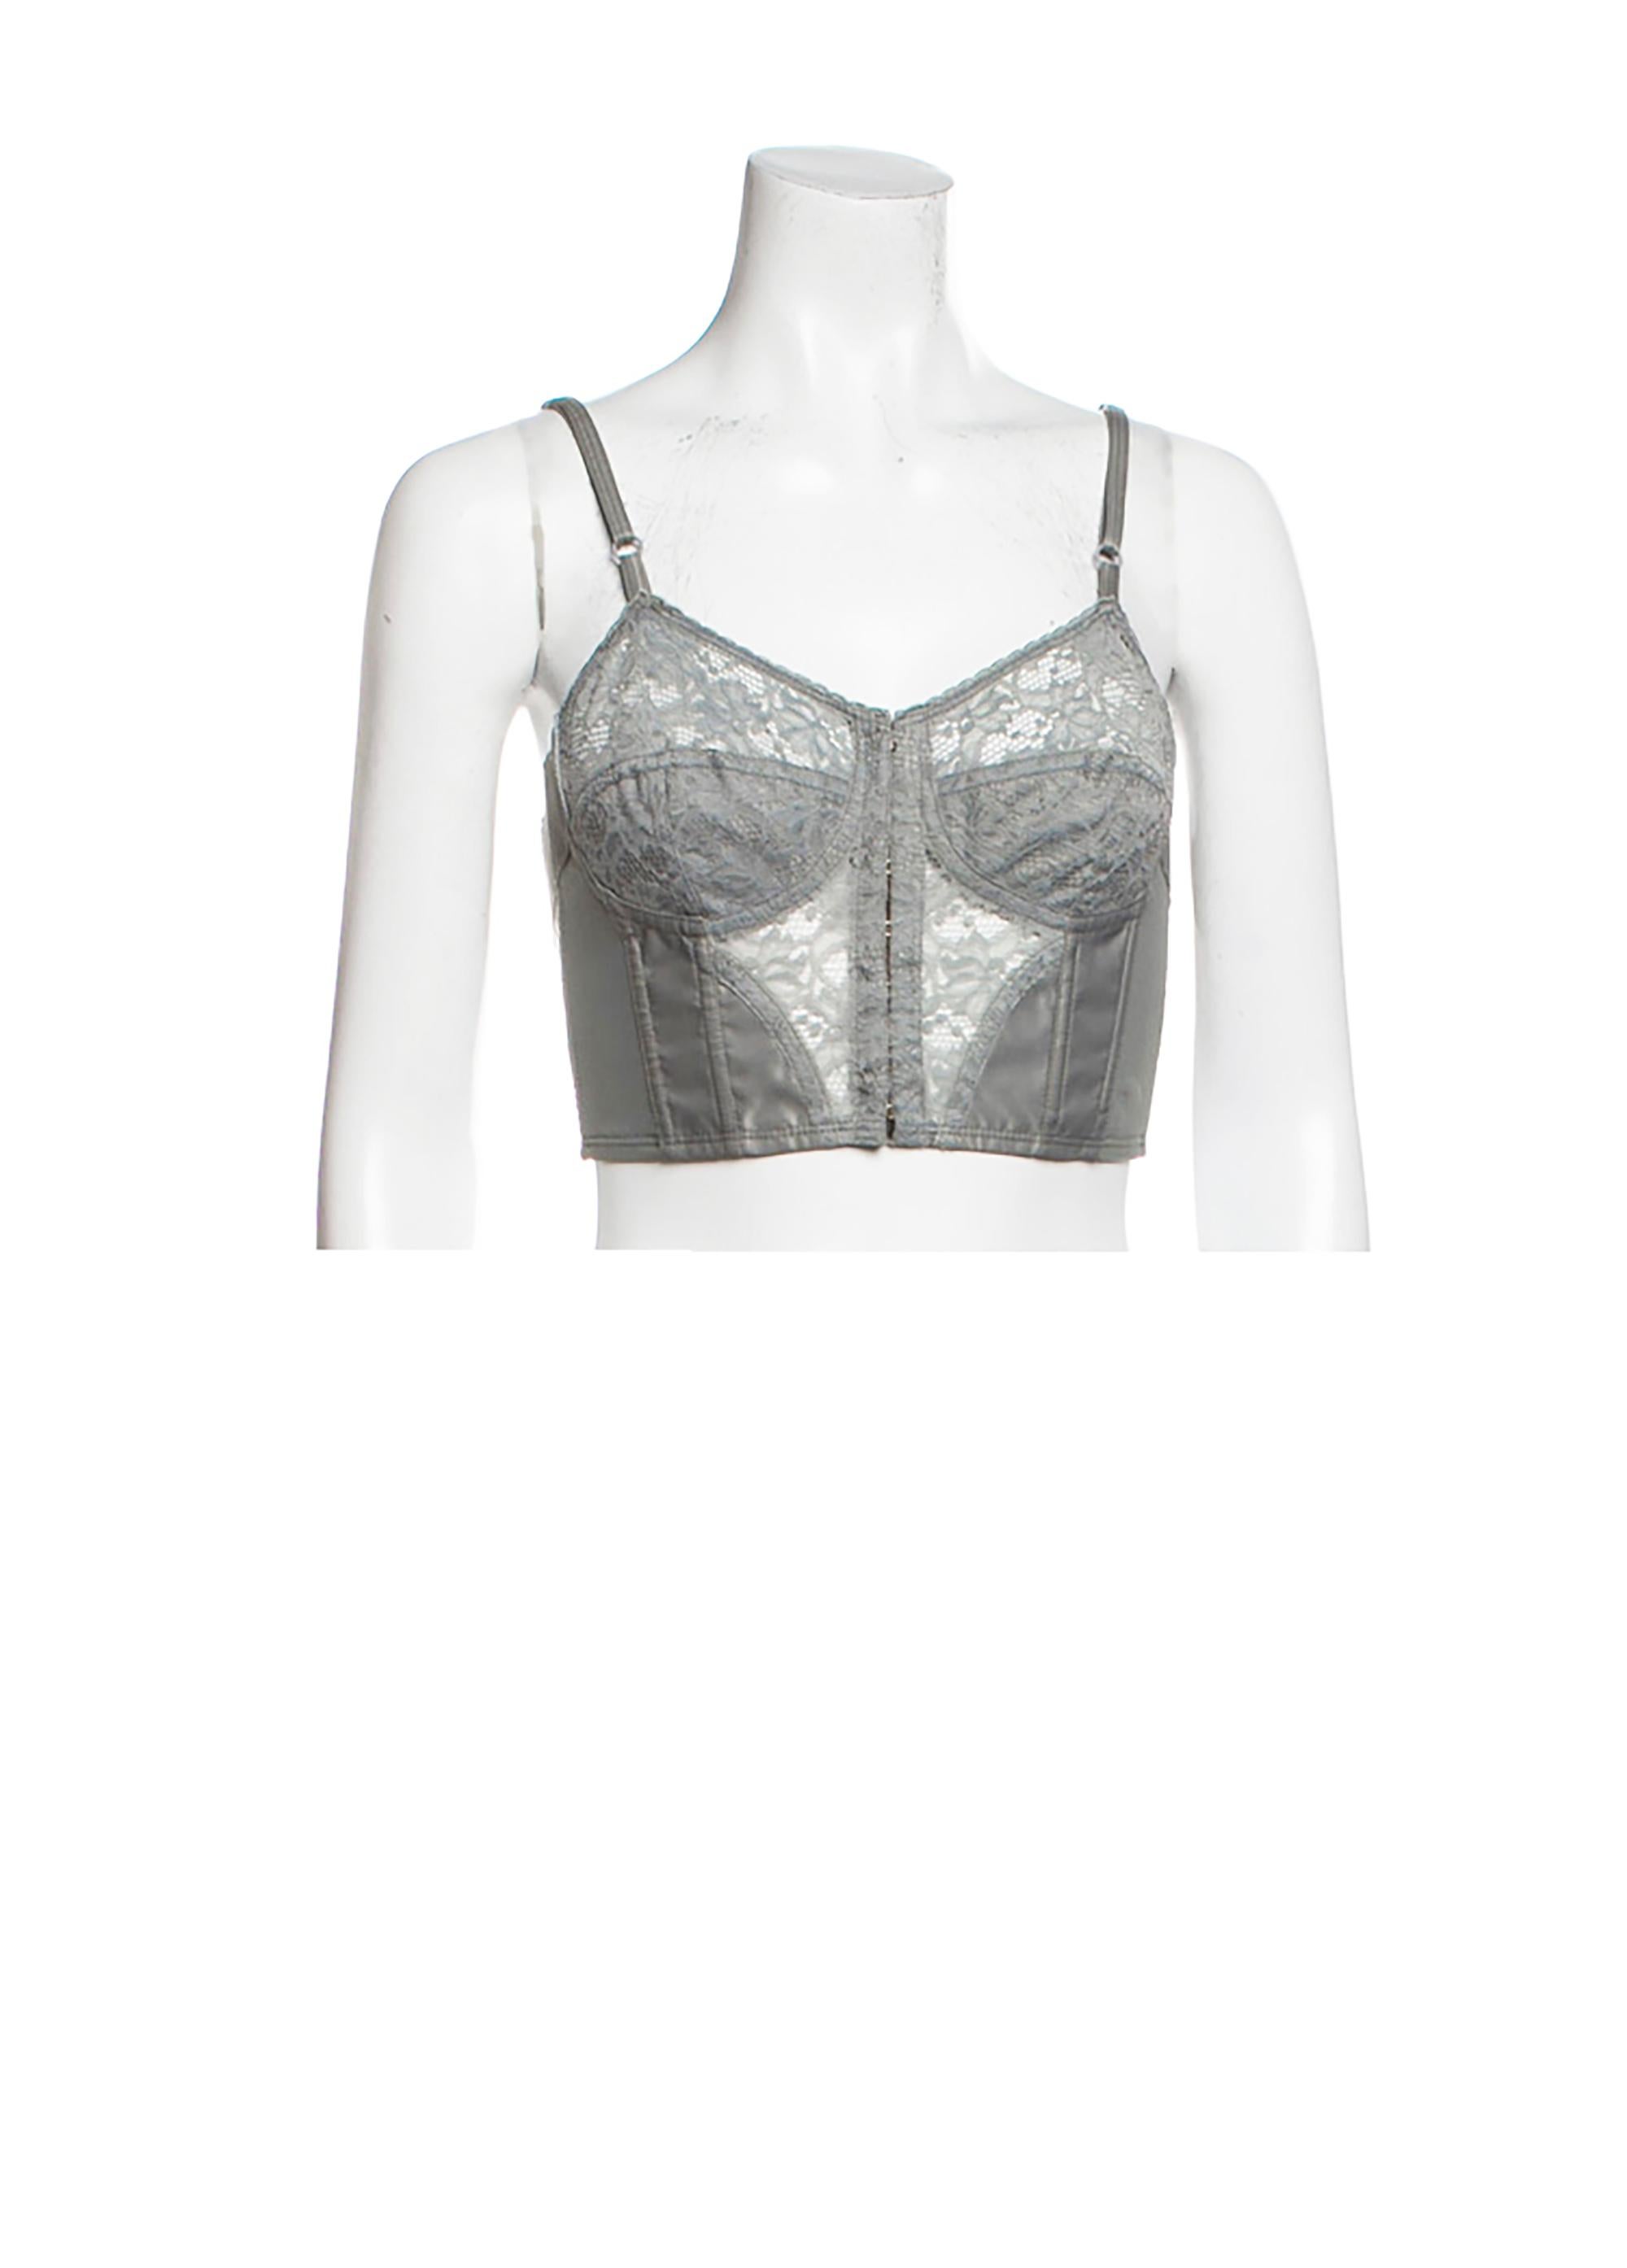 Dolce & Gabbana Grey Lace Crop Top with Hook and Eye Closure at Front
34